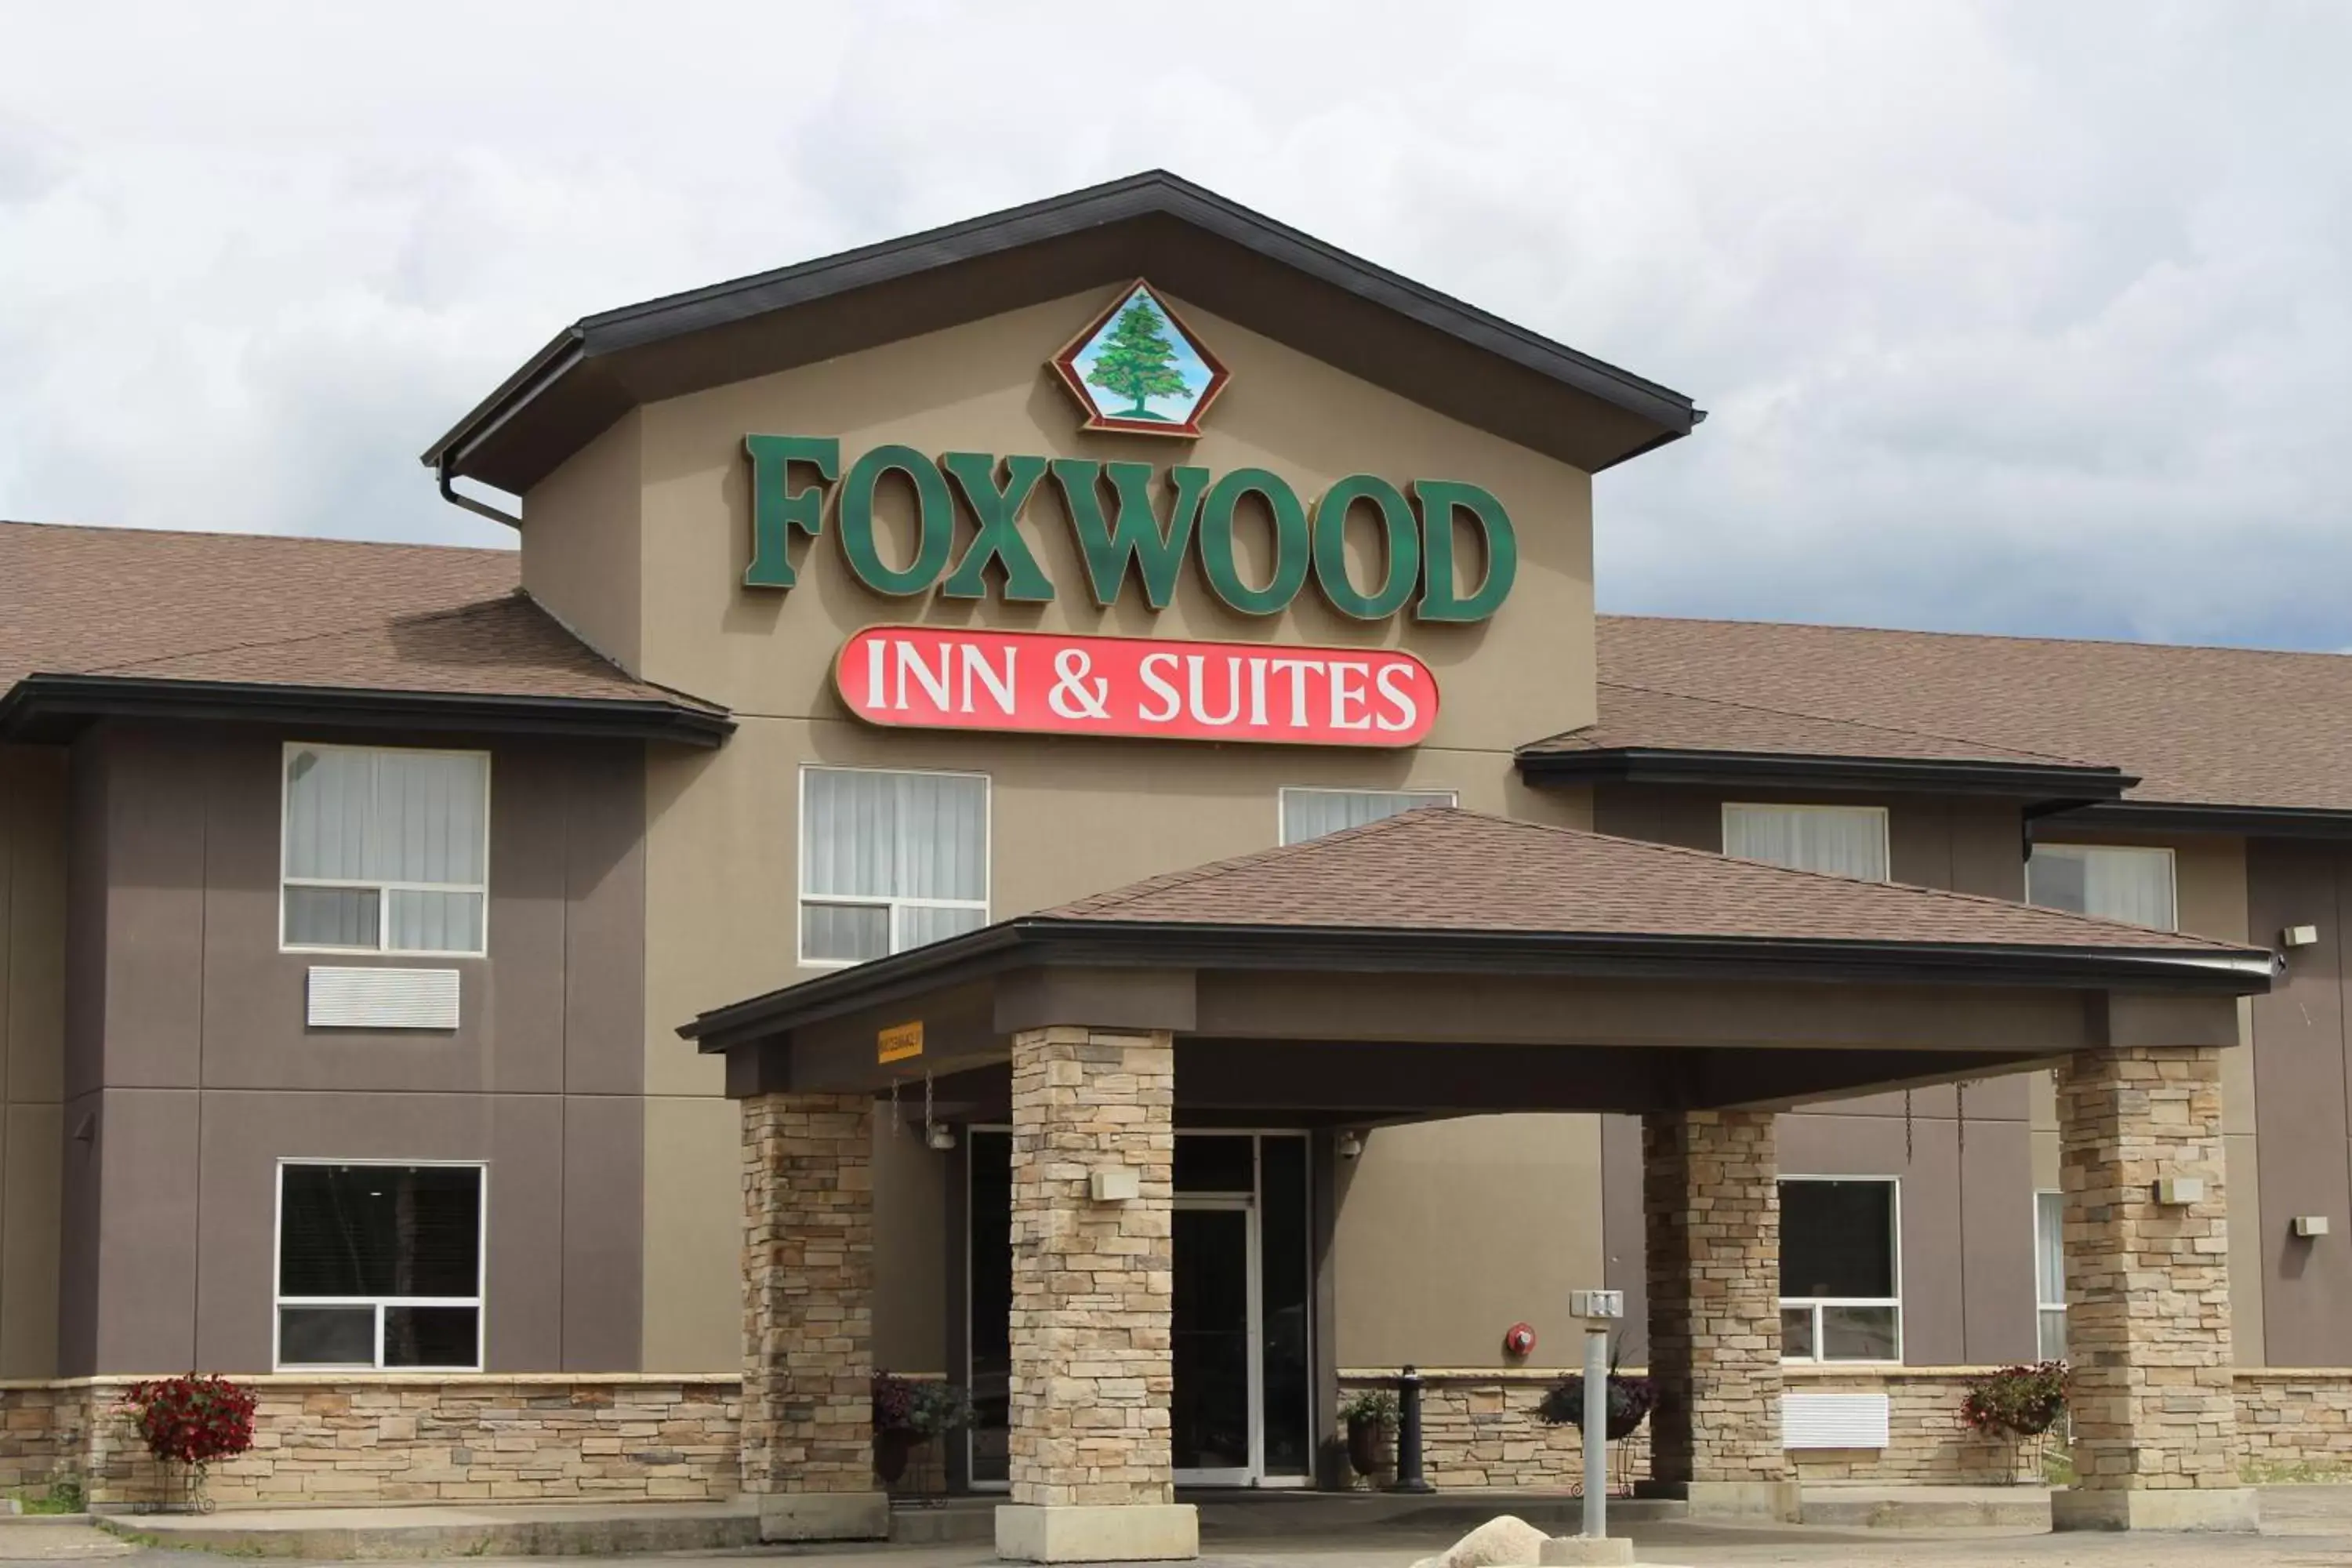 Facade/entrance in Foxwood Inn and Suites